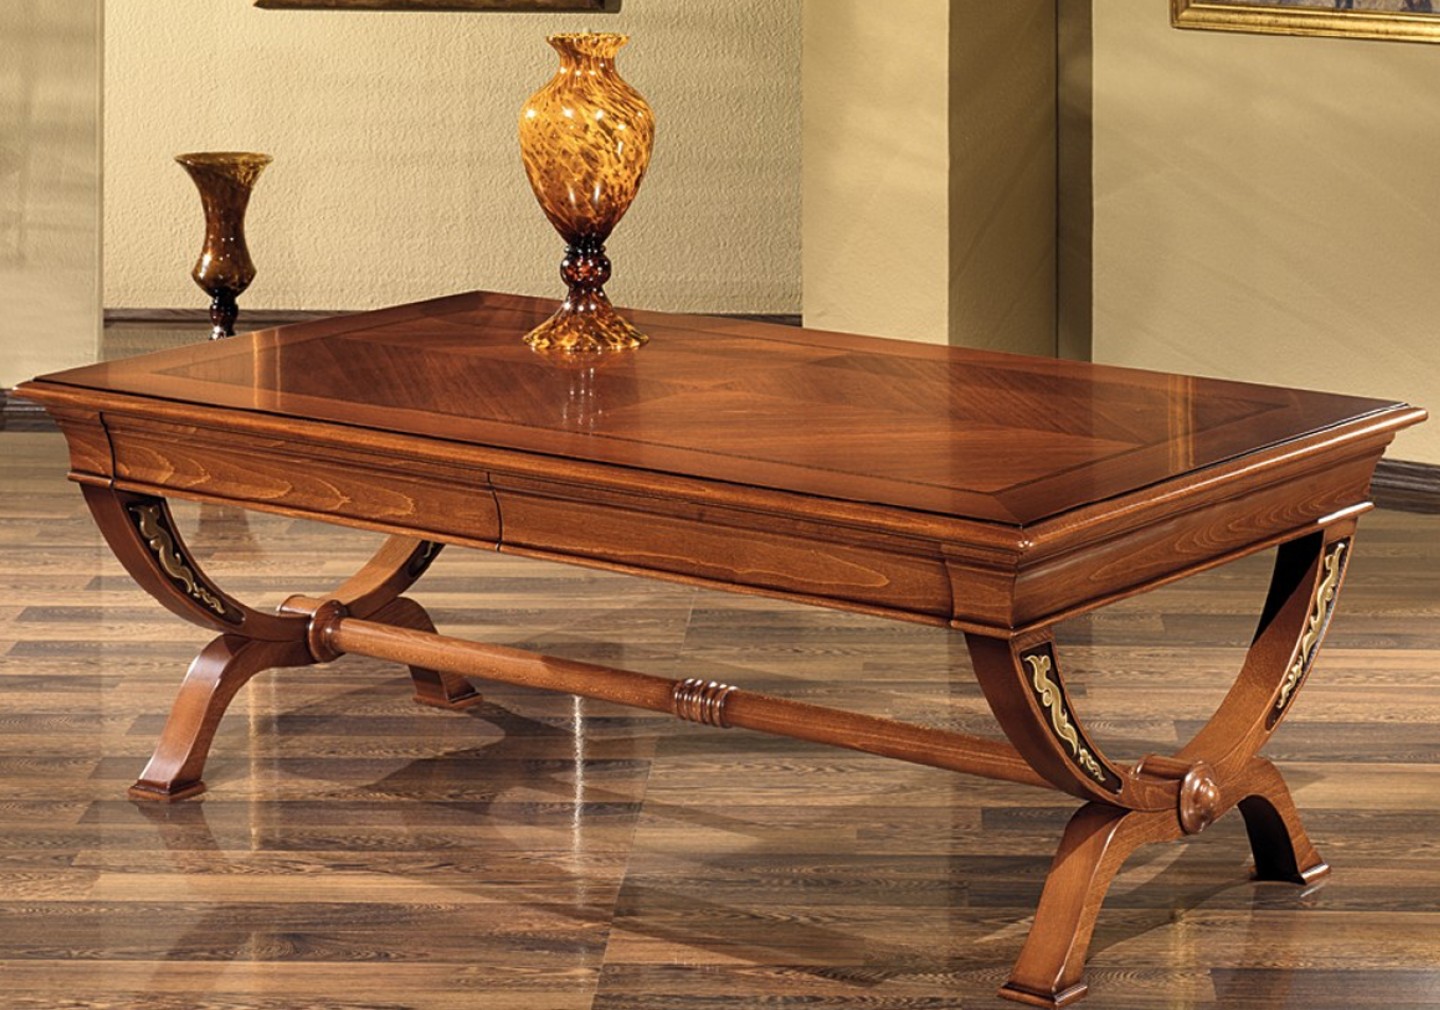 THE LISETTE CLASSIC COFFEE TABLE